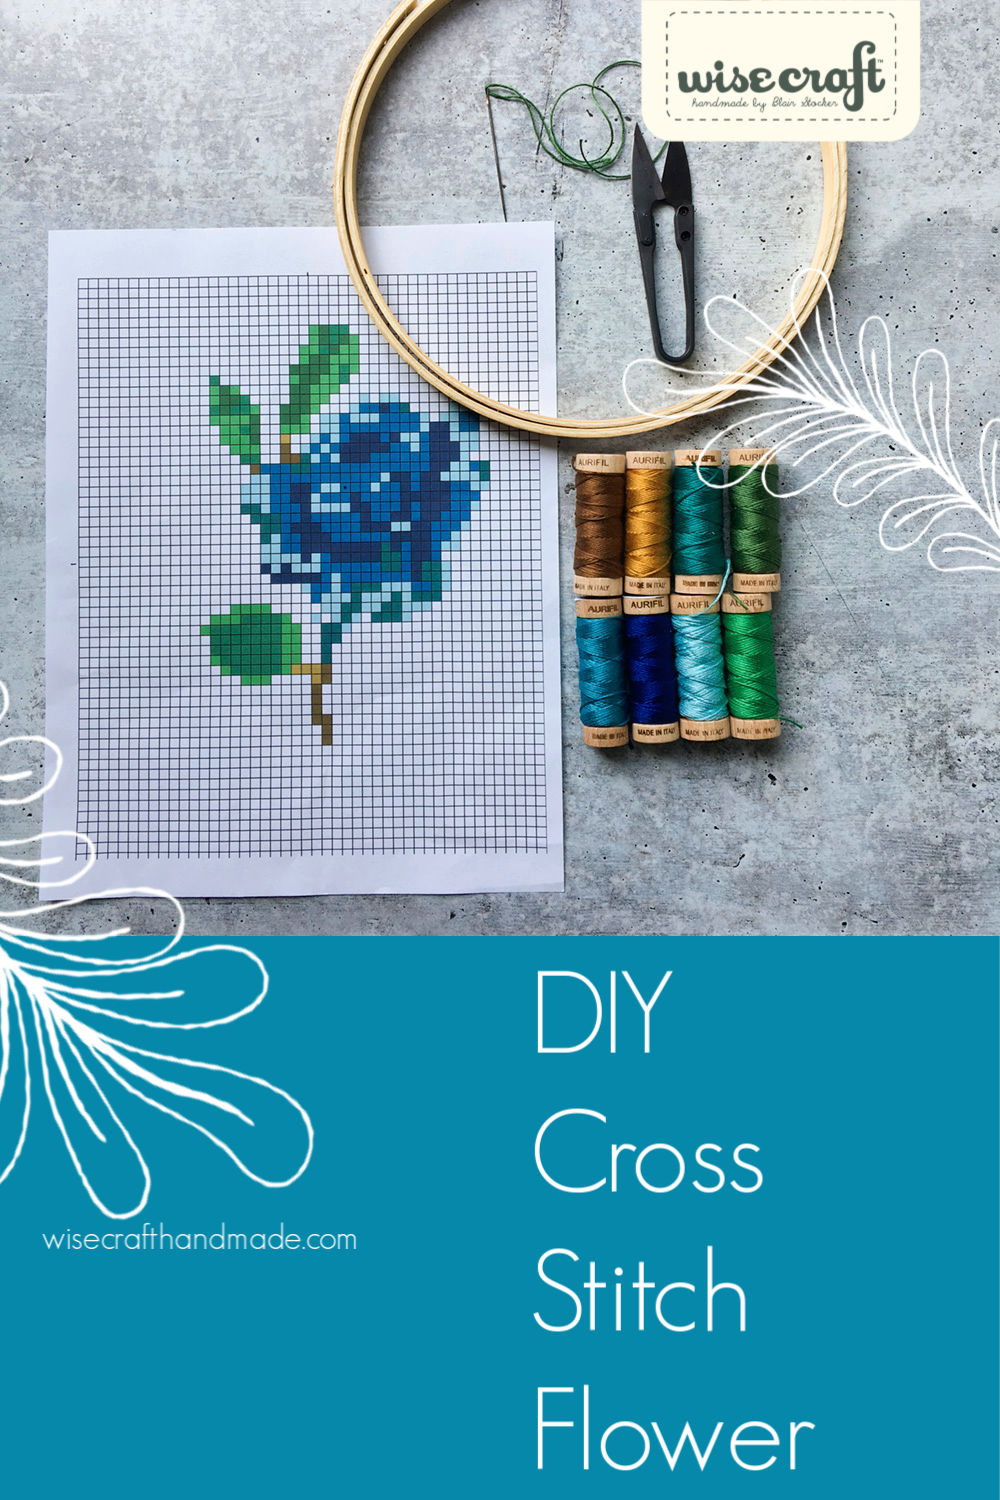 Cross Stitch Workshop - all the cross stitch supplies you need for